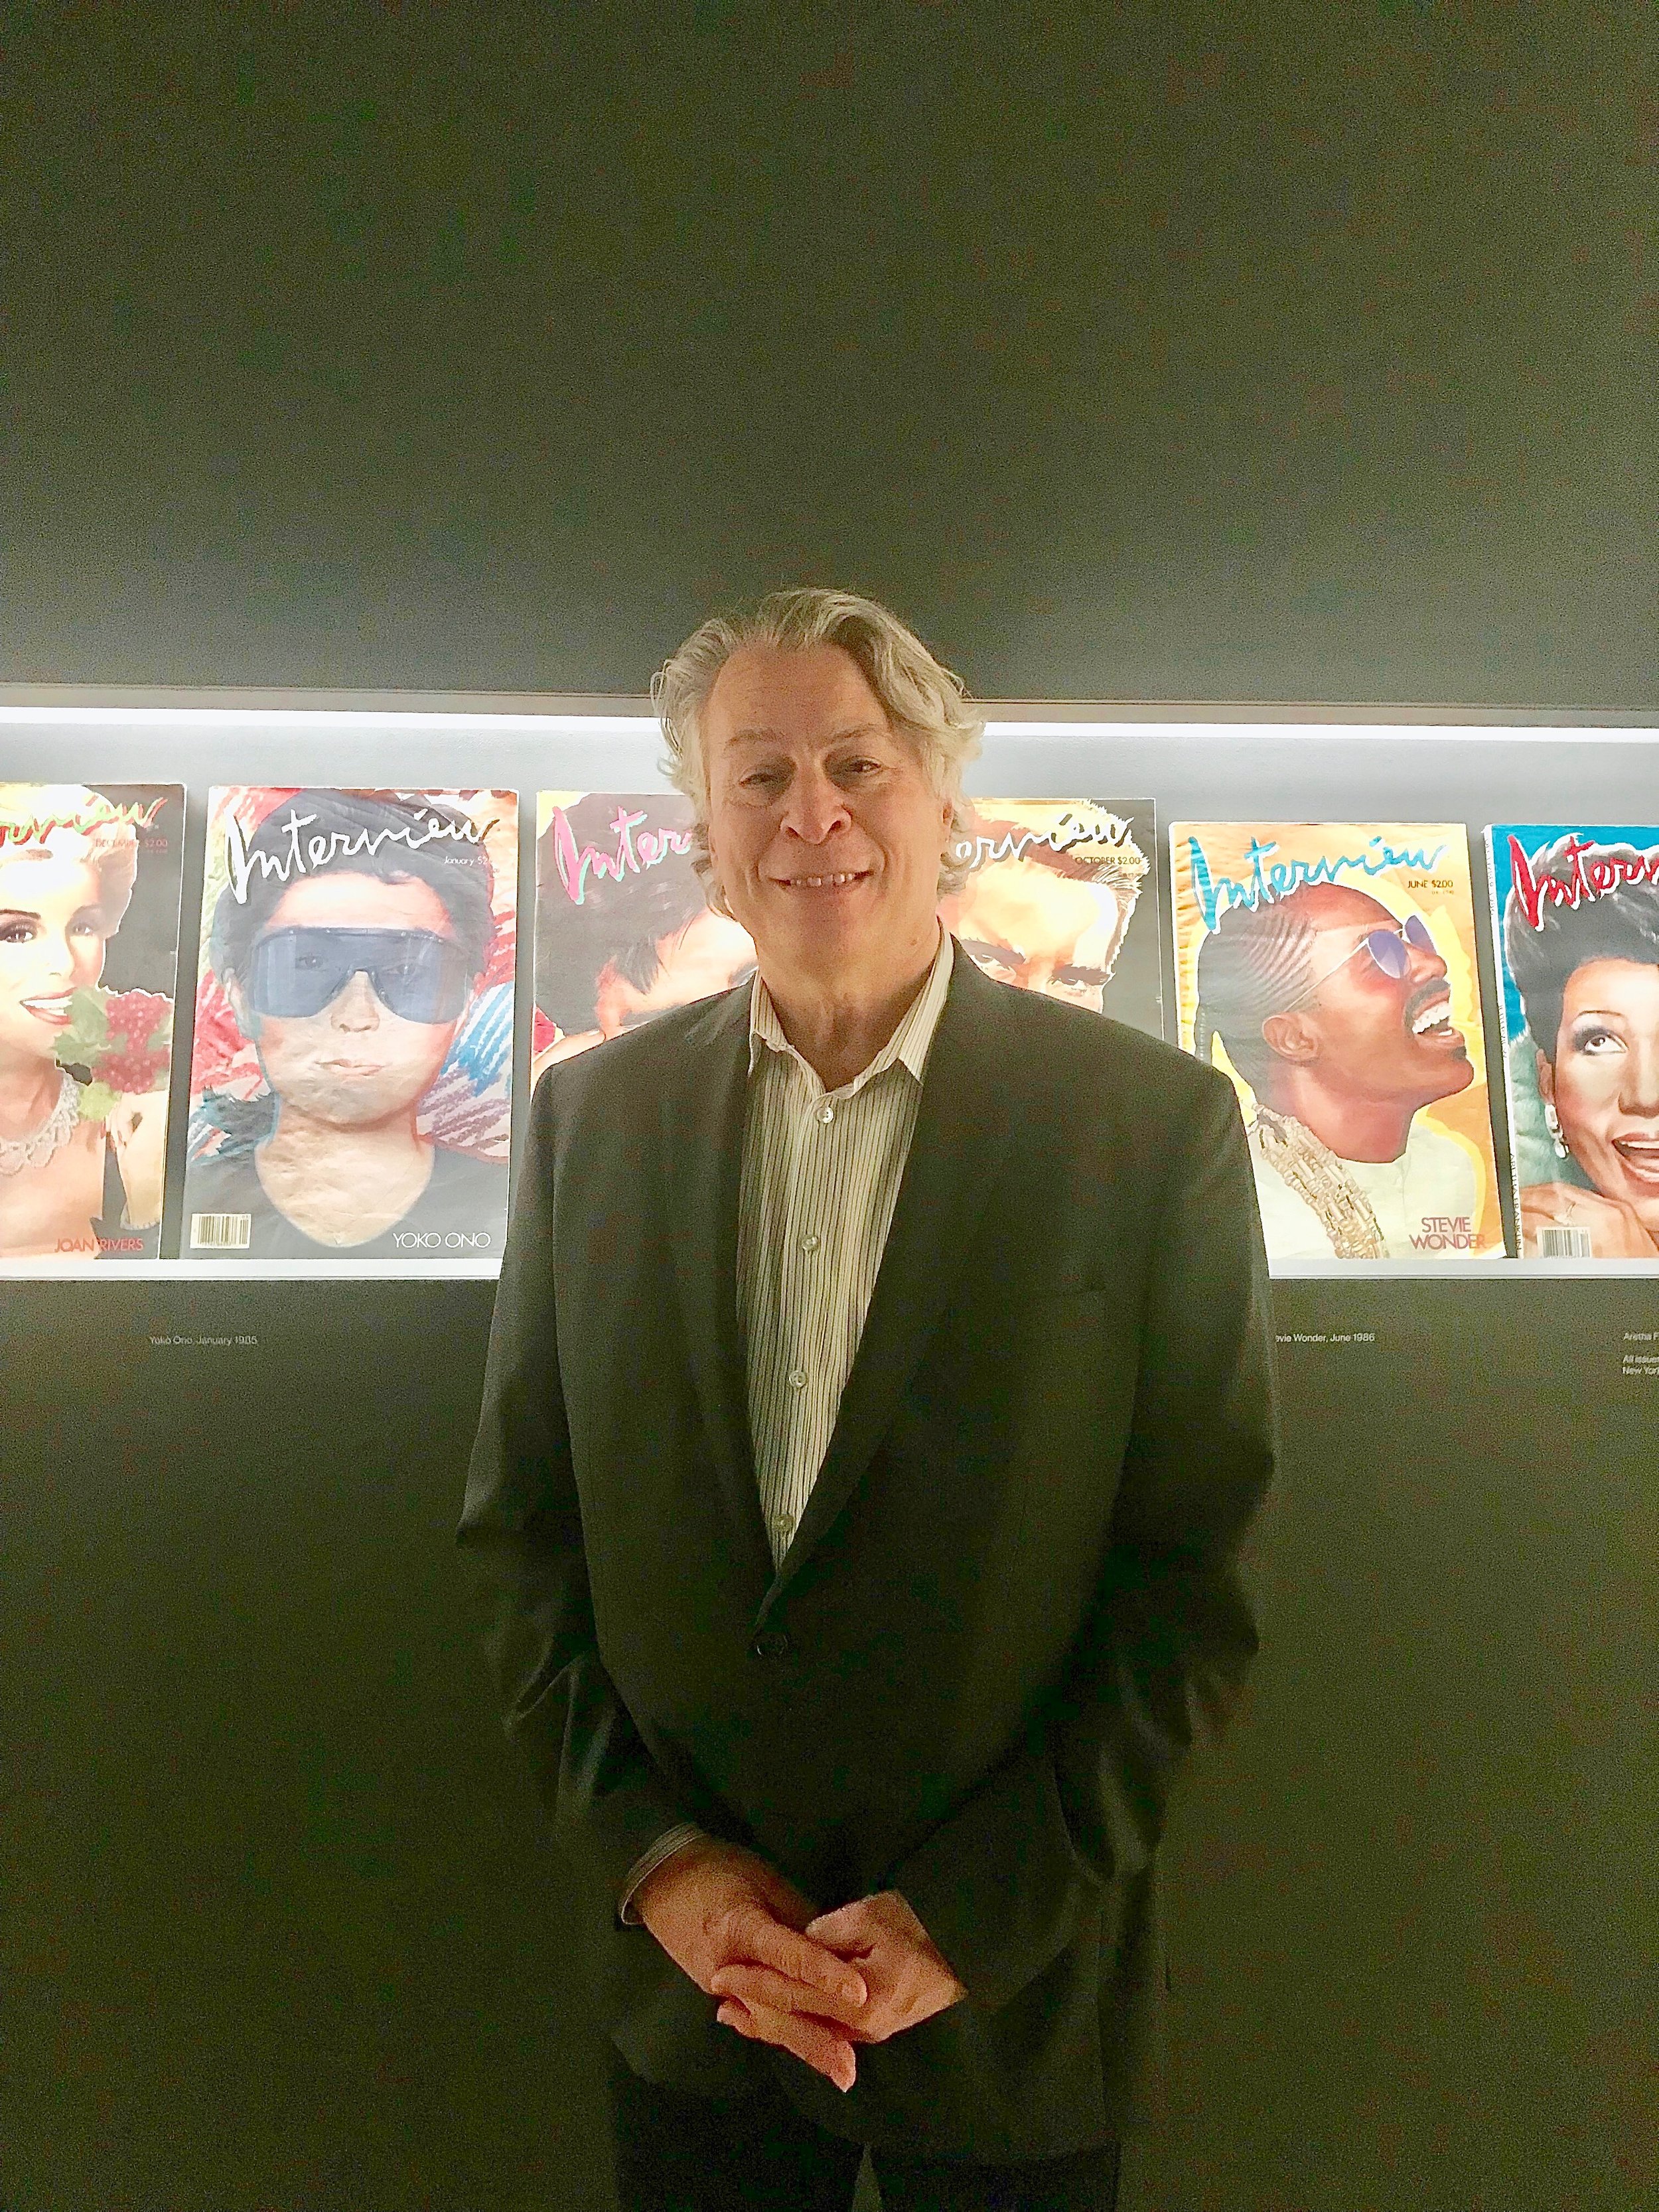  Interview Magazine installation at opening of Warhol exhibit at Whitney, November of 2018, with two of his covers (Yoko Ono, Stevie Wonder).  